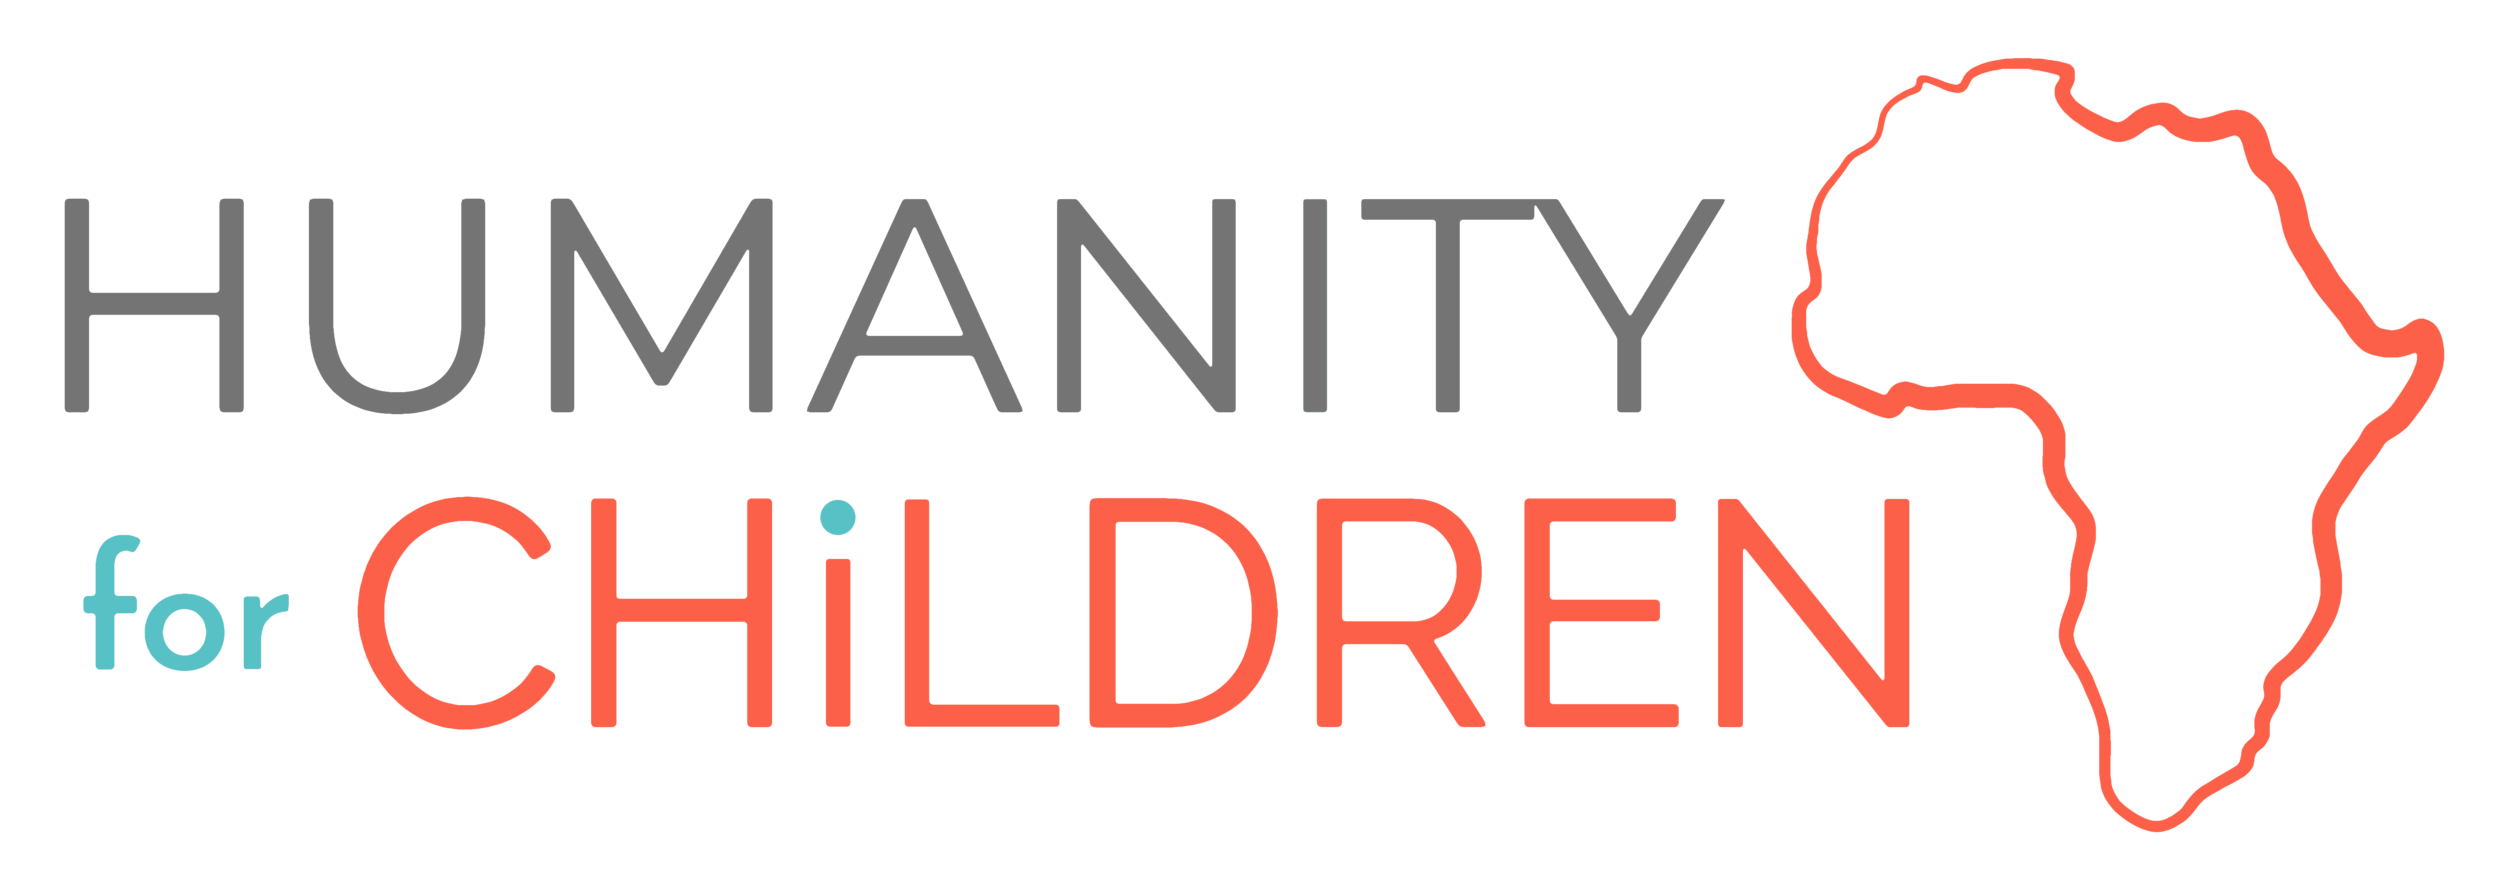 Humanity for Children